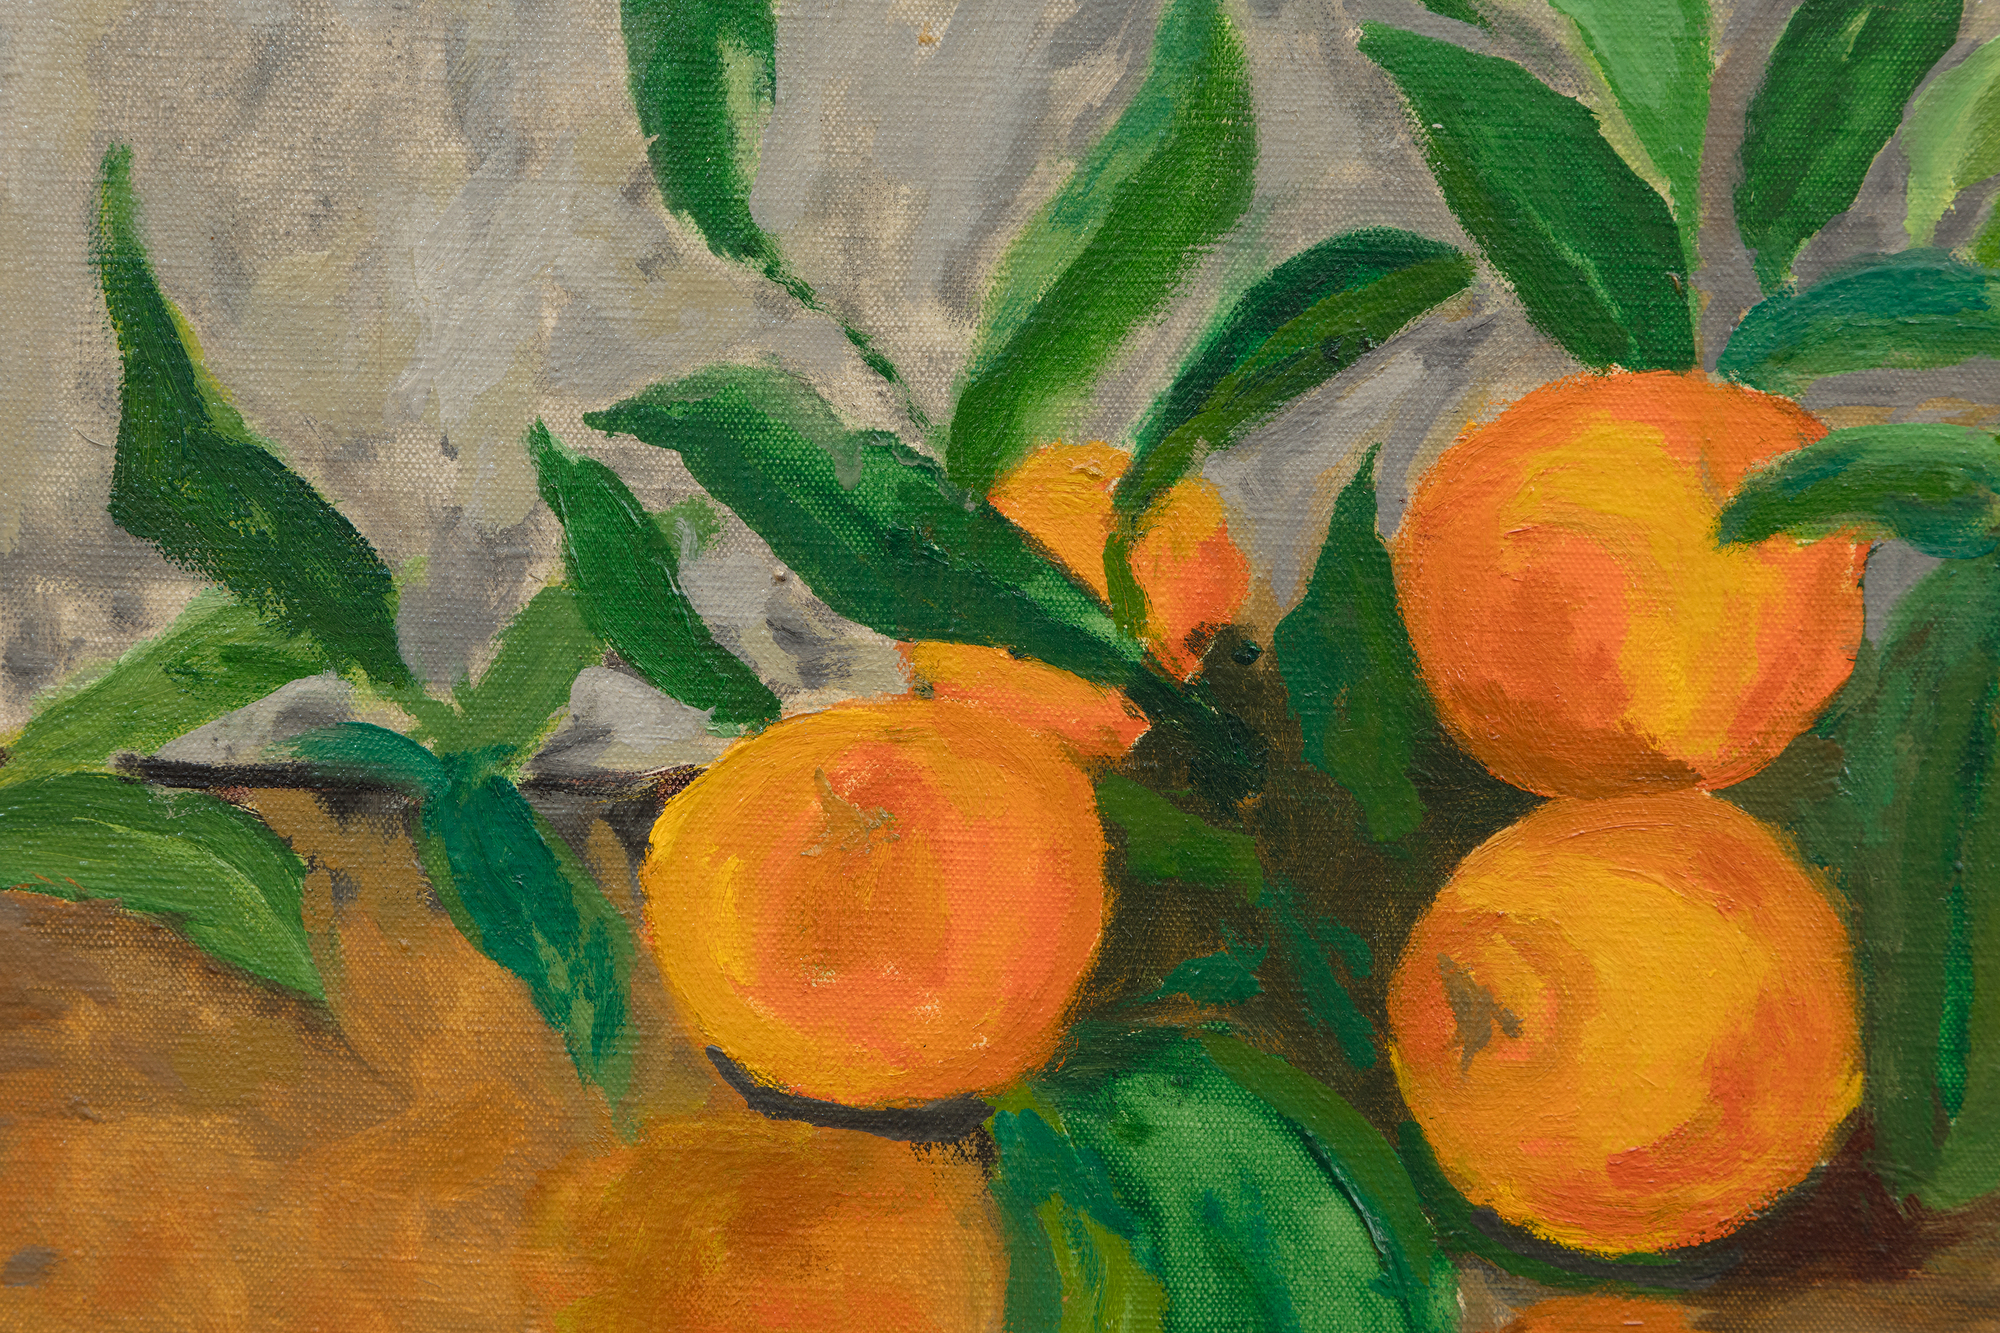 Still lifes like Oranges and Lemons (C 455) give us an insight to the rich and colorful life of Churchill, just as his landscapes and seascapes do. Churchill painted Oranges and Lemons at La Pausa. Churchill would often frequent La Pausa as the guest of his literary agent, Emery Reves and his wife, Wendy.  Reves purchased the home from Coco Chanel.  While other members of the Churchill family did not share his enthusiasm, Churchill and his daughter Sarah loved the place, which Churchill affectionately called “LaPausaland”.
<br>
<br>To avoid painting outside on a chilly January morning, Wendy Reves arranged the fruit for Churchill to paint. Surrounded by the Reves’s superb collection of Impressionist and Post-Impressionist works, including a number of paintings by Paul Cézanne, Oranges and Lemons illuminates Churchill’s relationships and the influence of Cézanne, who he admired. The painting, like Churchill, has lived a colorful life, exhibited at both the 1959 Royal Academy of Art exhibition of his paintings and the 1965 New York World’s Fair.